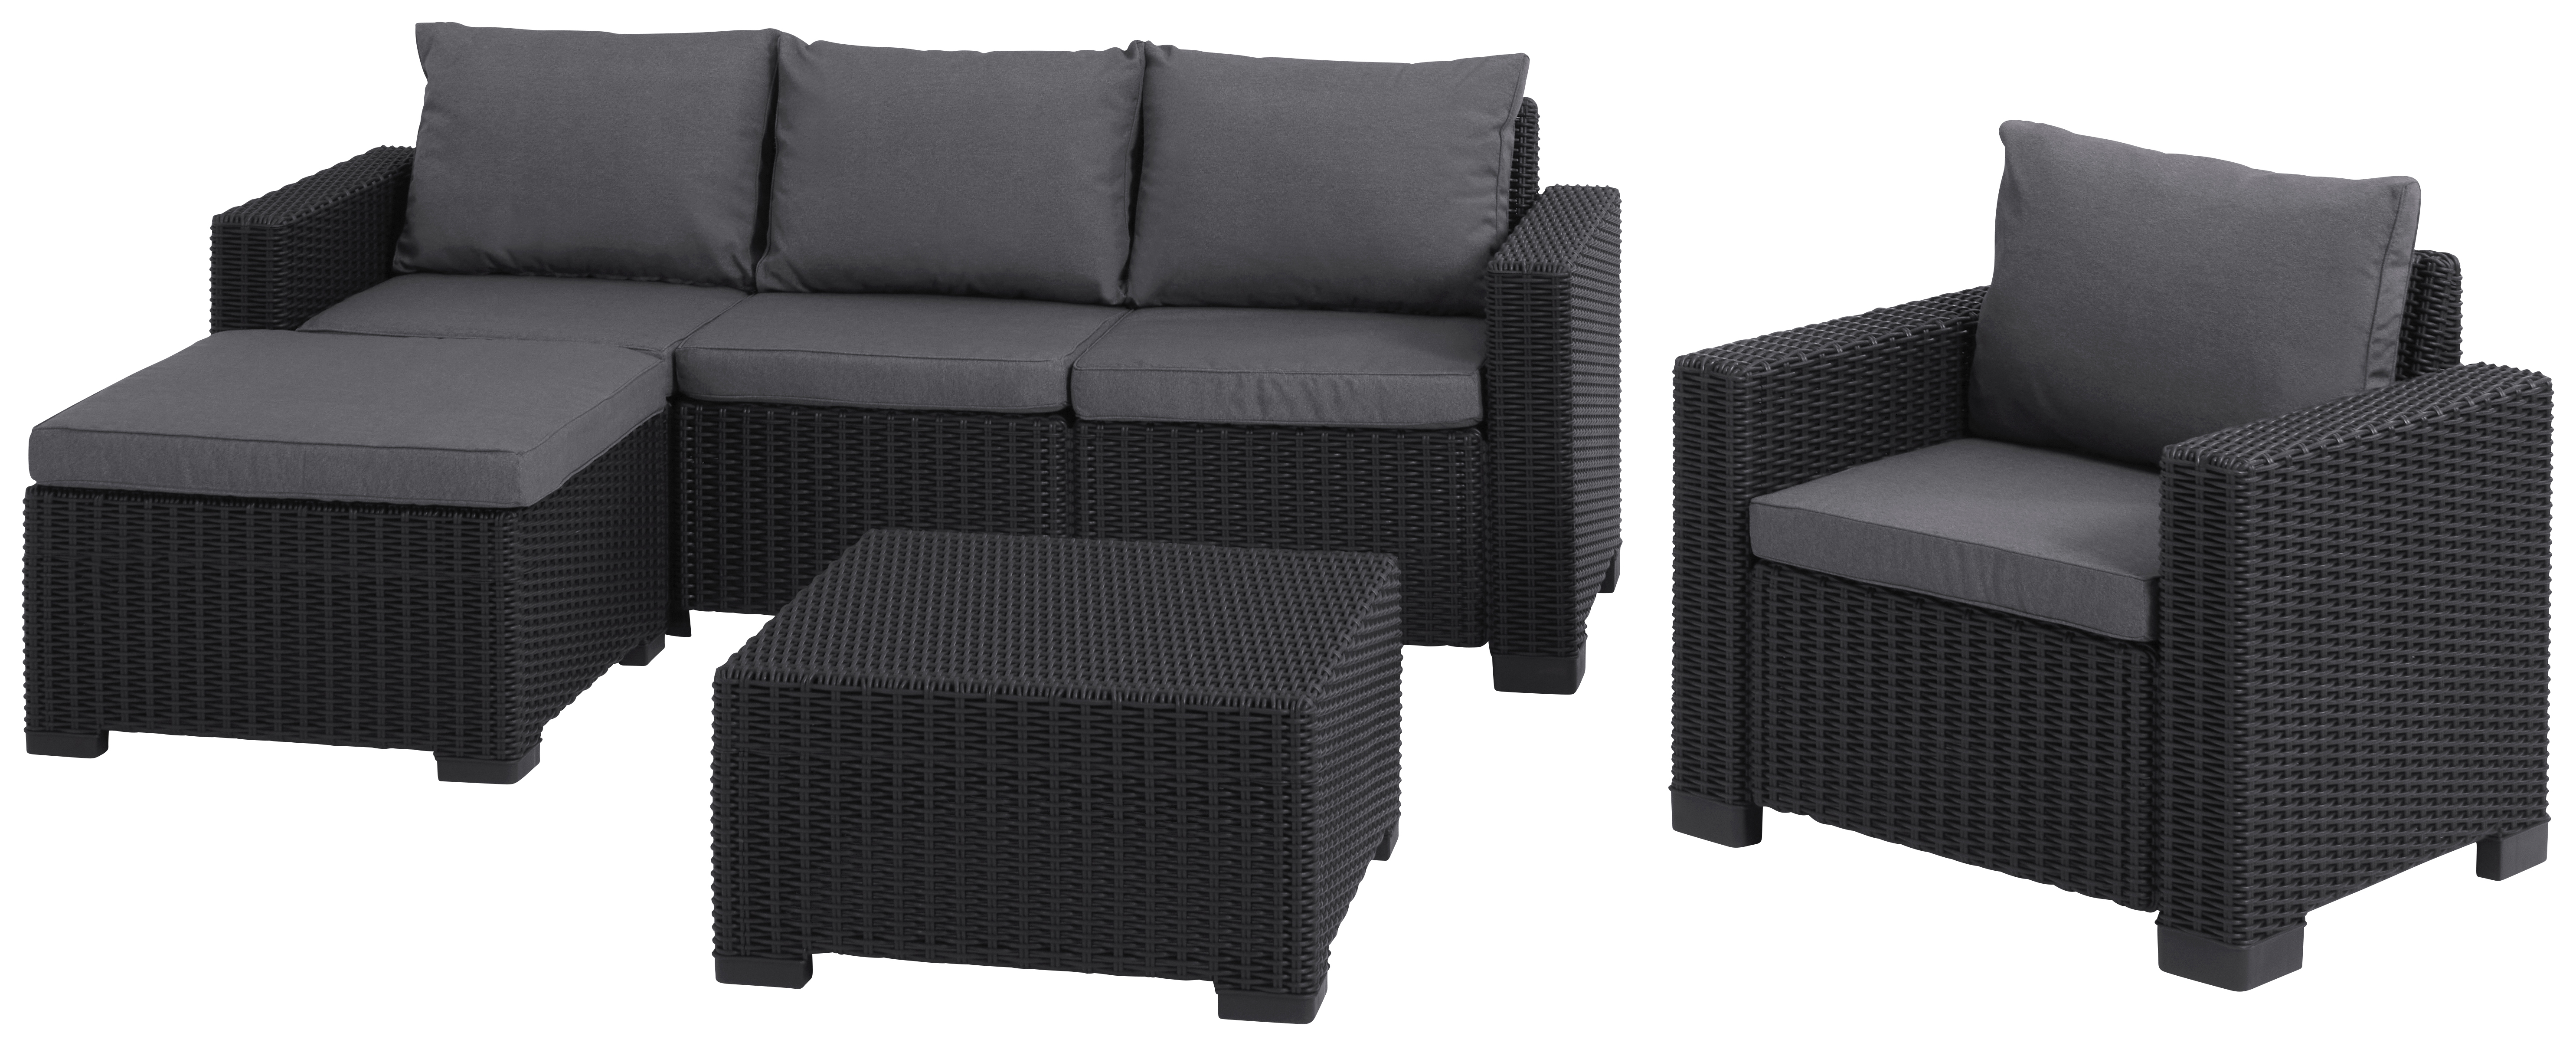 Keter California 4 Seater Outdoor Garden Furniture Chaise Lounge Set - Graphite with Grey Cushions